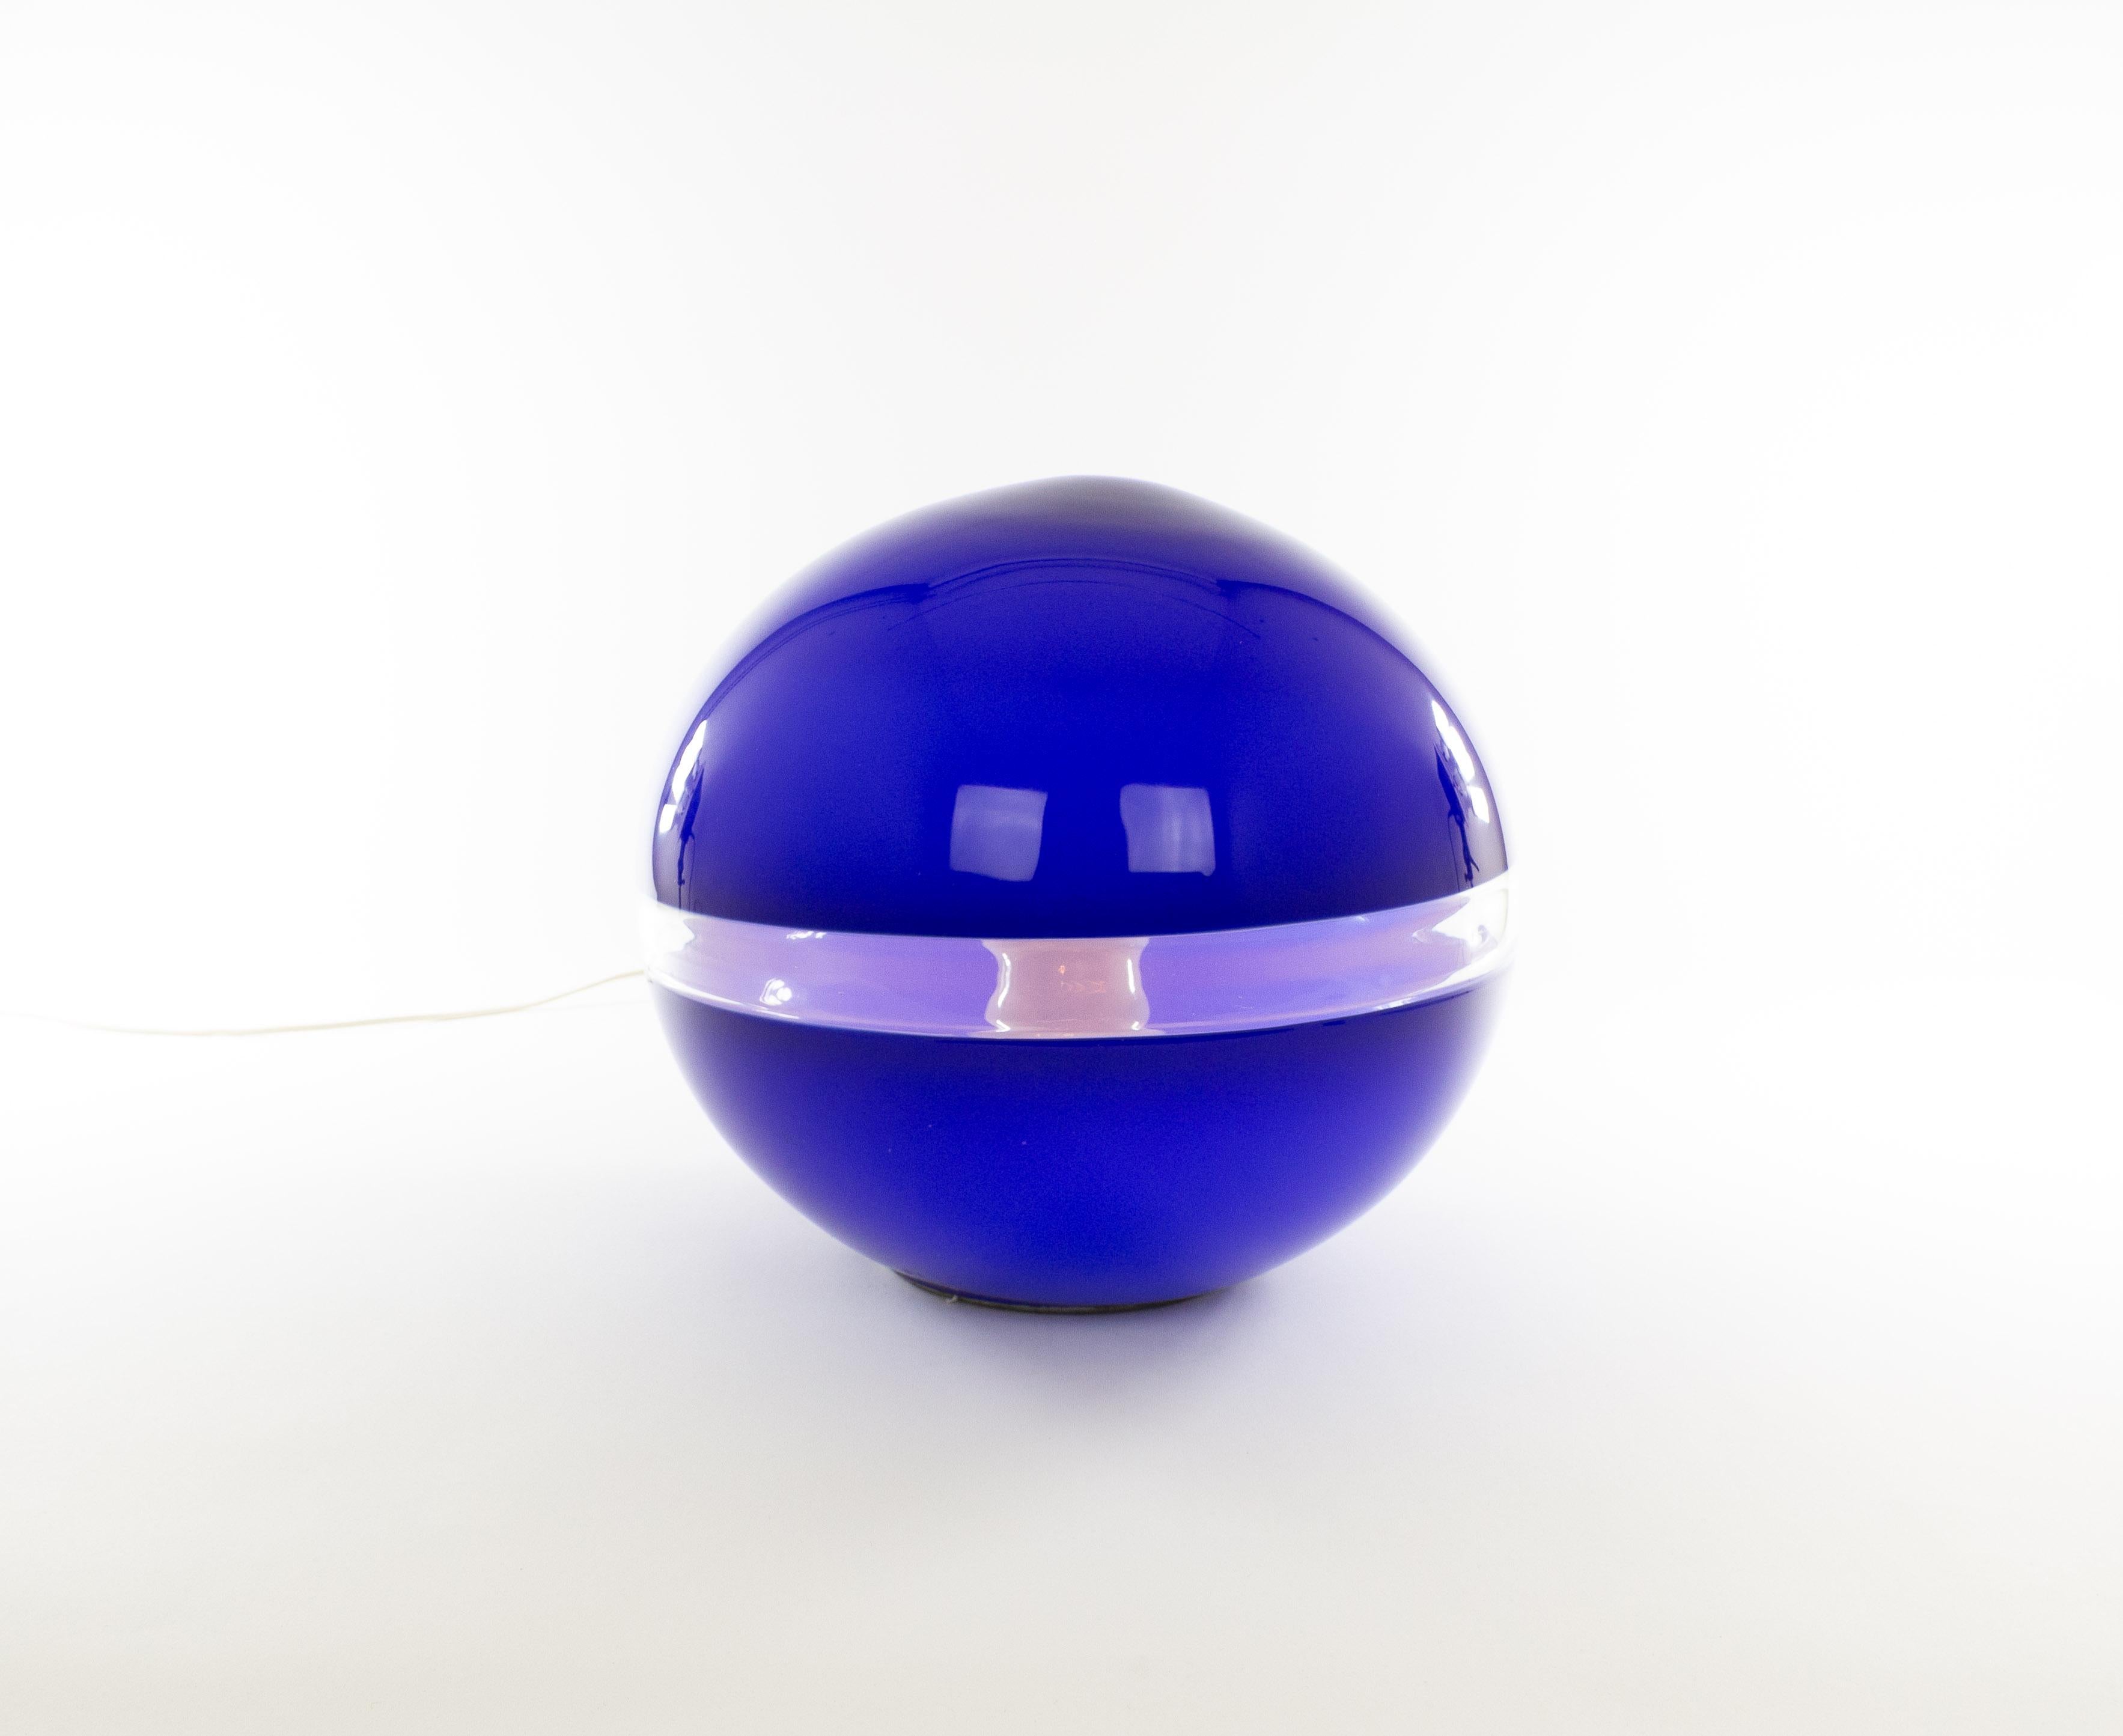 Deep blue LT 231 table lamp designed by Carlo Nason and manufactured in the 1960s by Murano glassmaker A.V. Mazzega. The lamp is made of blue Murano glass and has a crystal band.

This model was produced in two sizes; this is the larger version